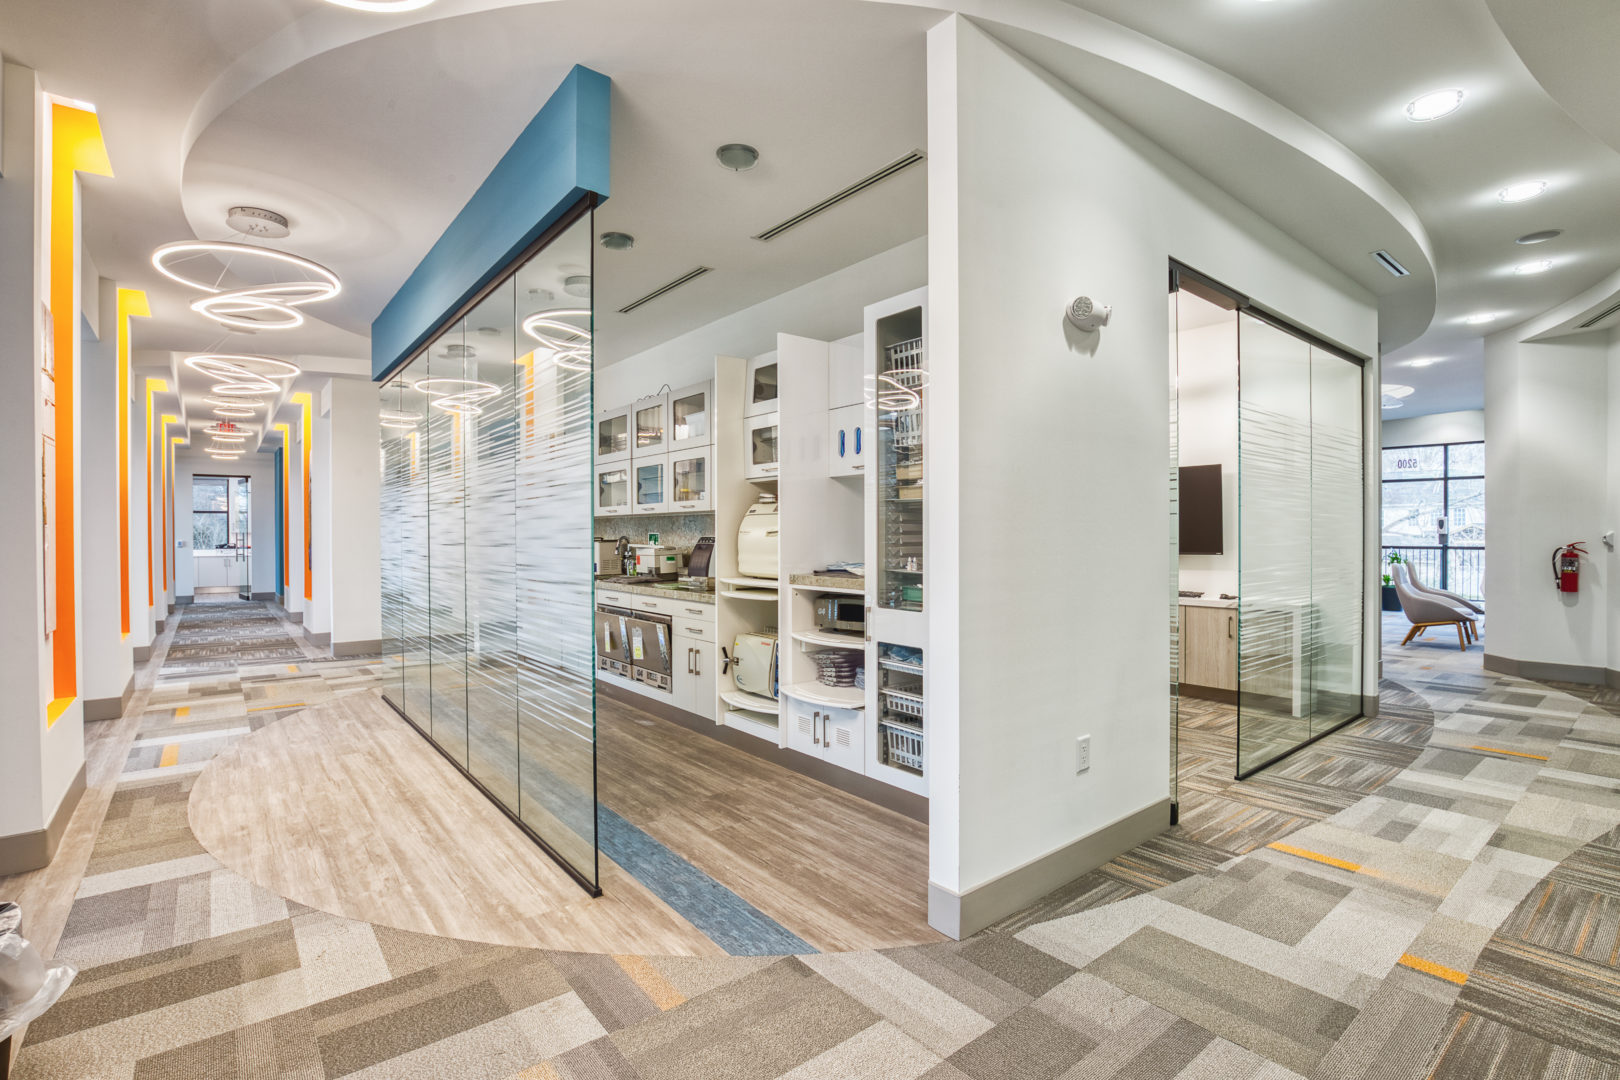 A view of the center of the office highlights stylish glass wall and unique lighting.